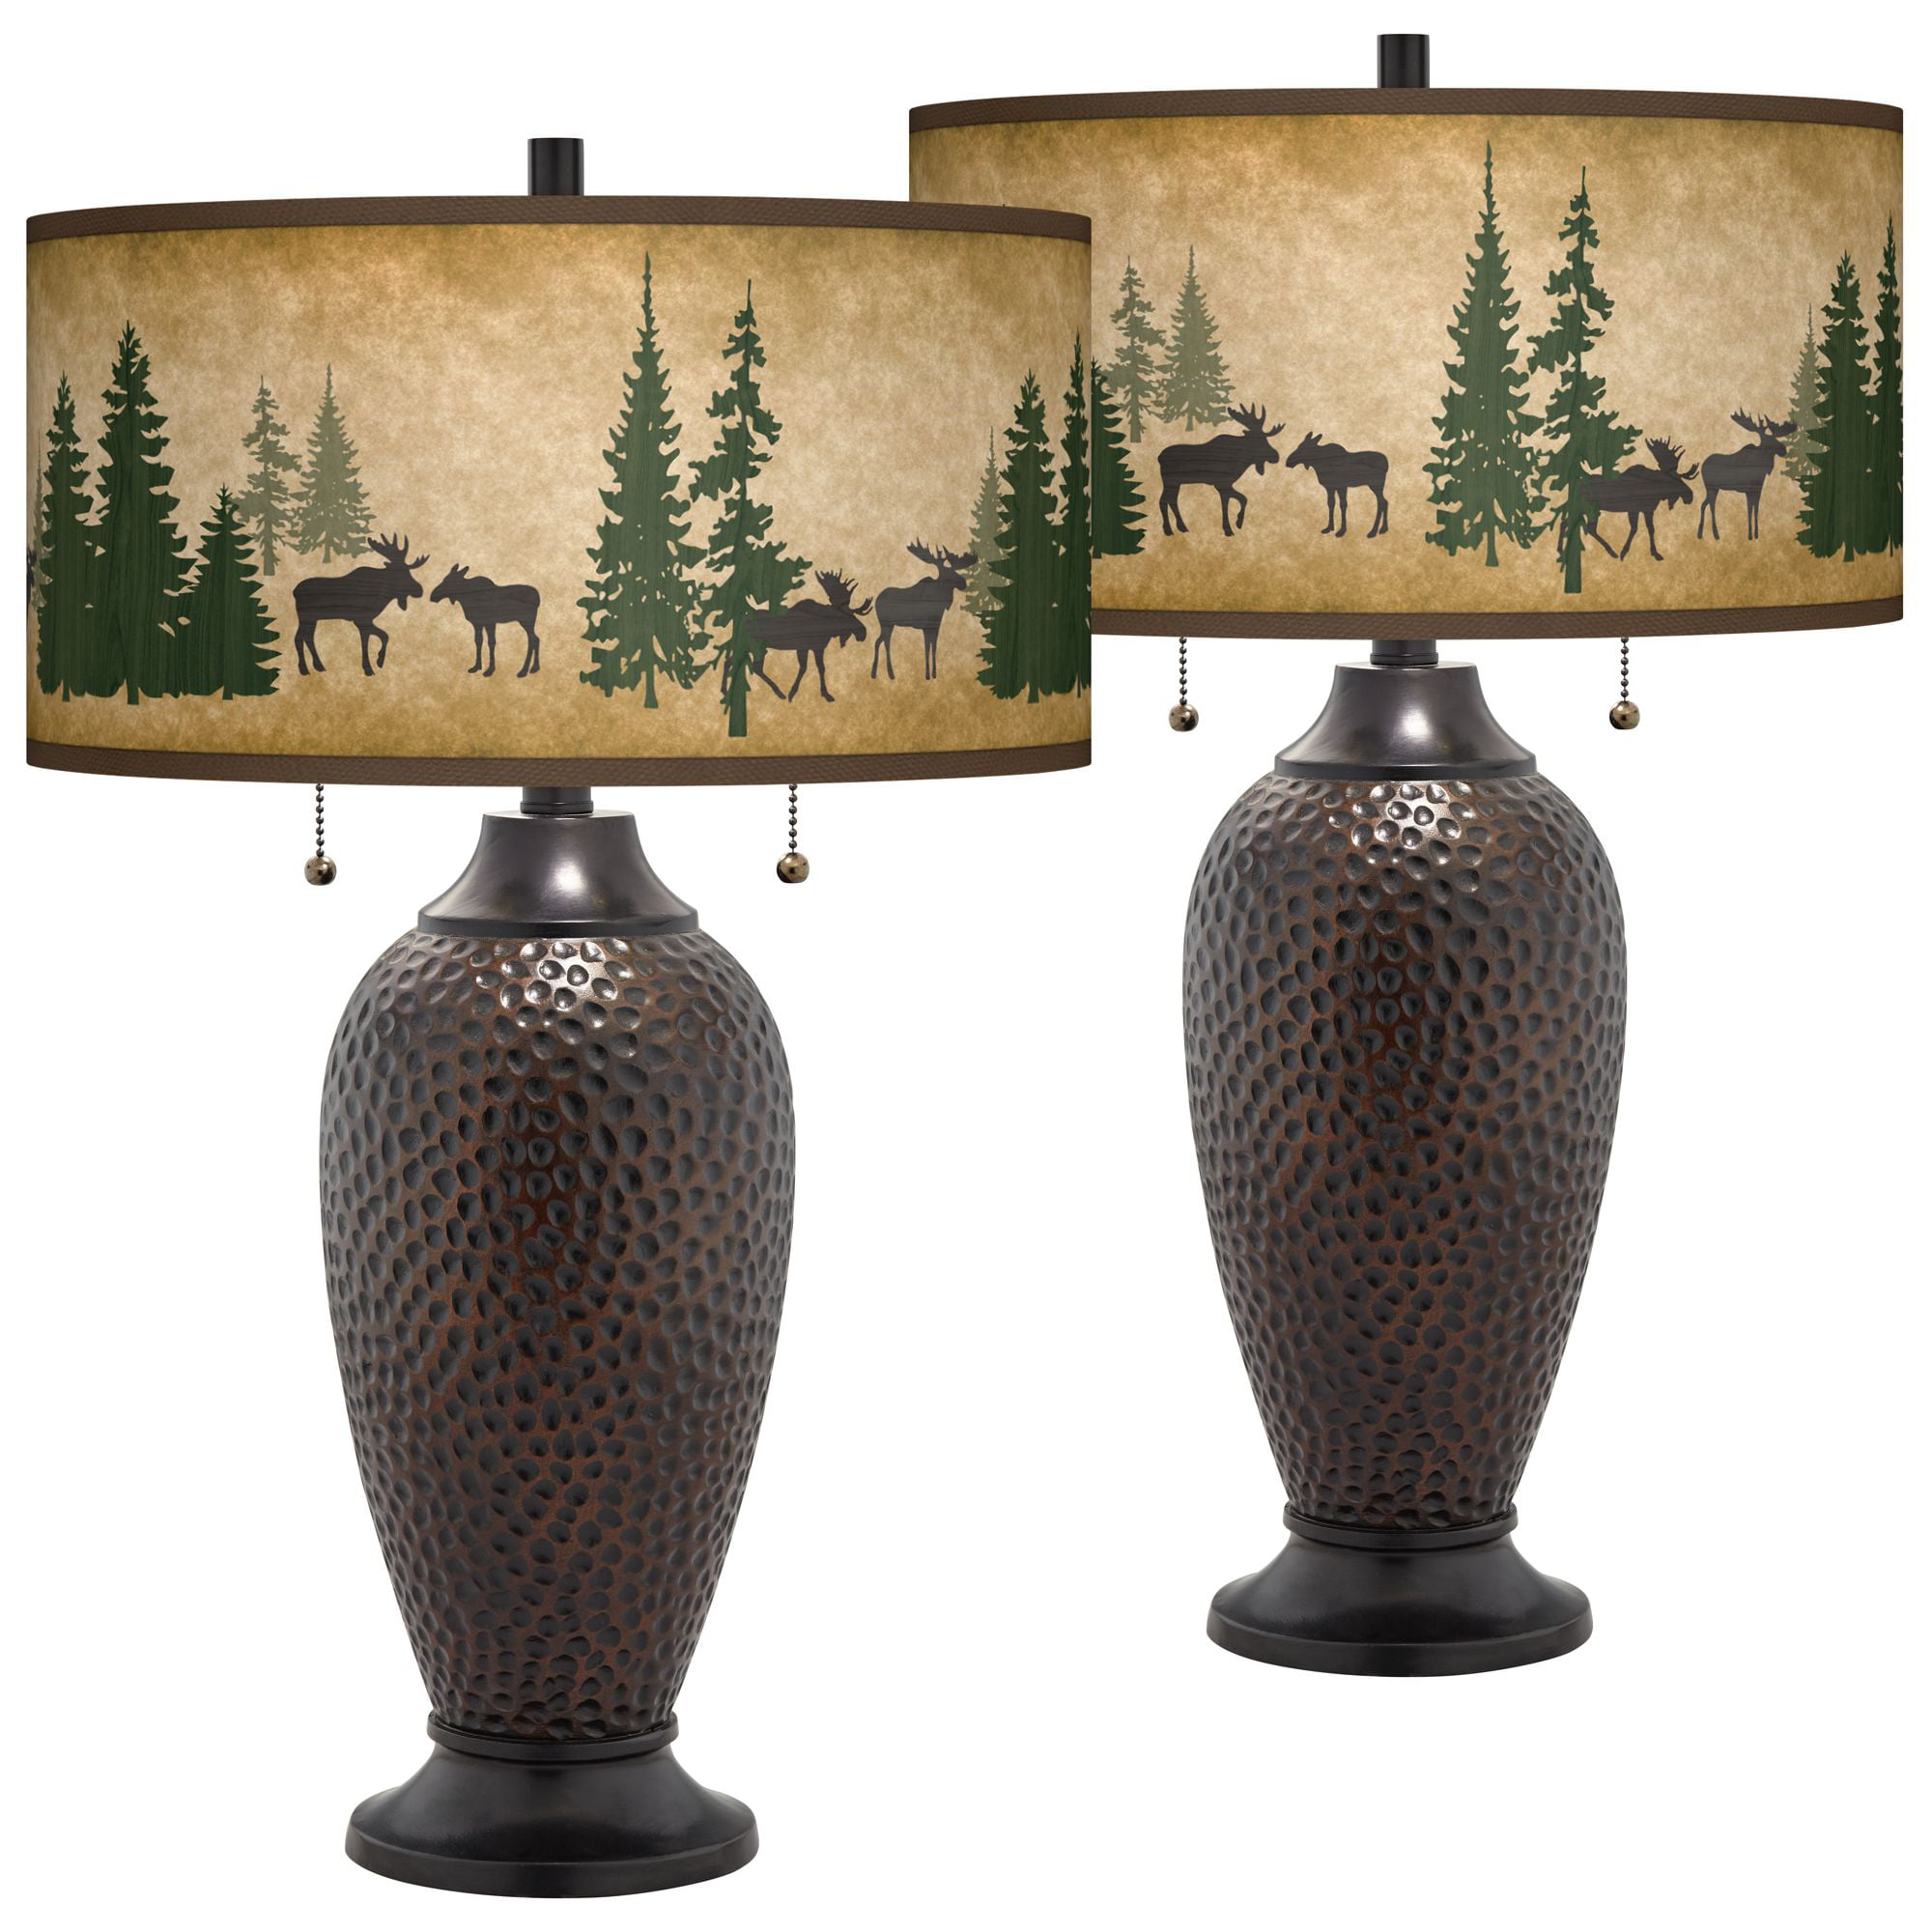 Giclee Glow Moose Lodge Zoey Hammered Oil-Rubbed Bronze Table Lamps Set of 2